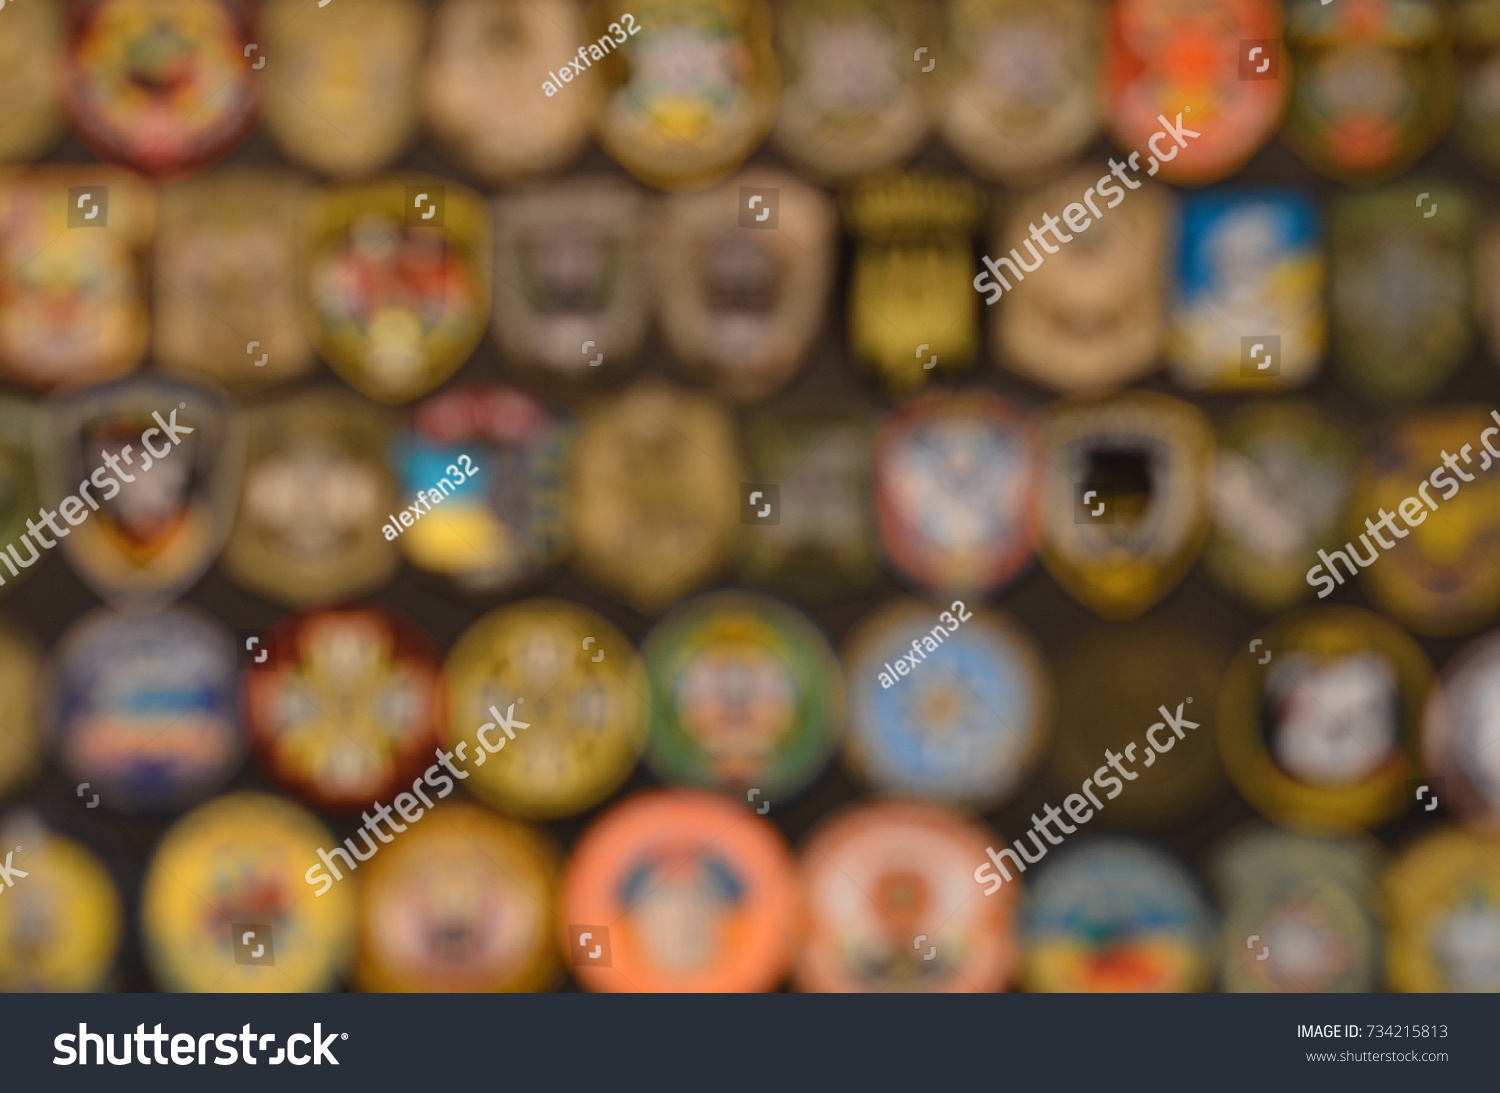 military chevrons in blur background #734215813